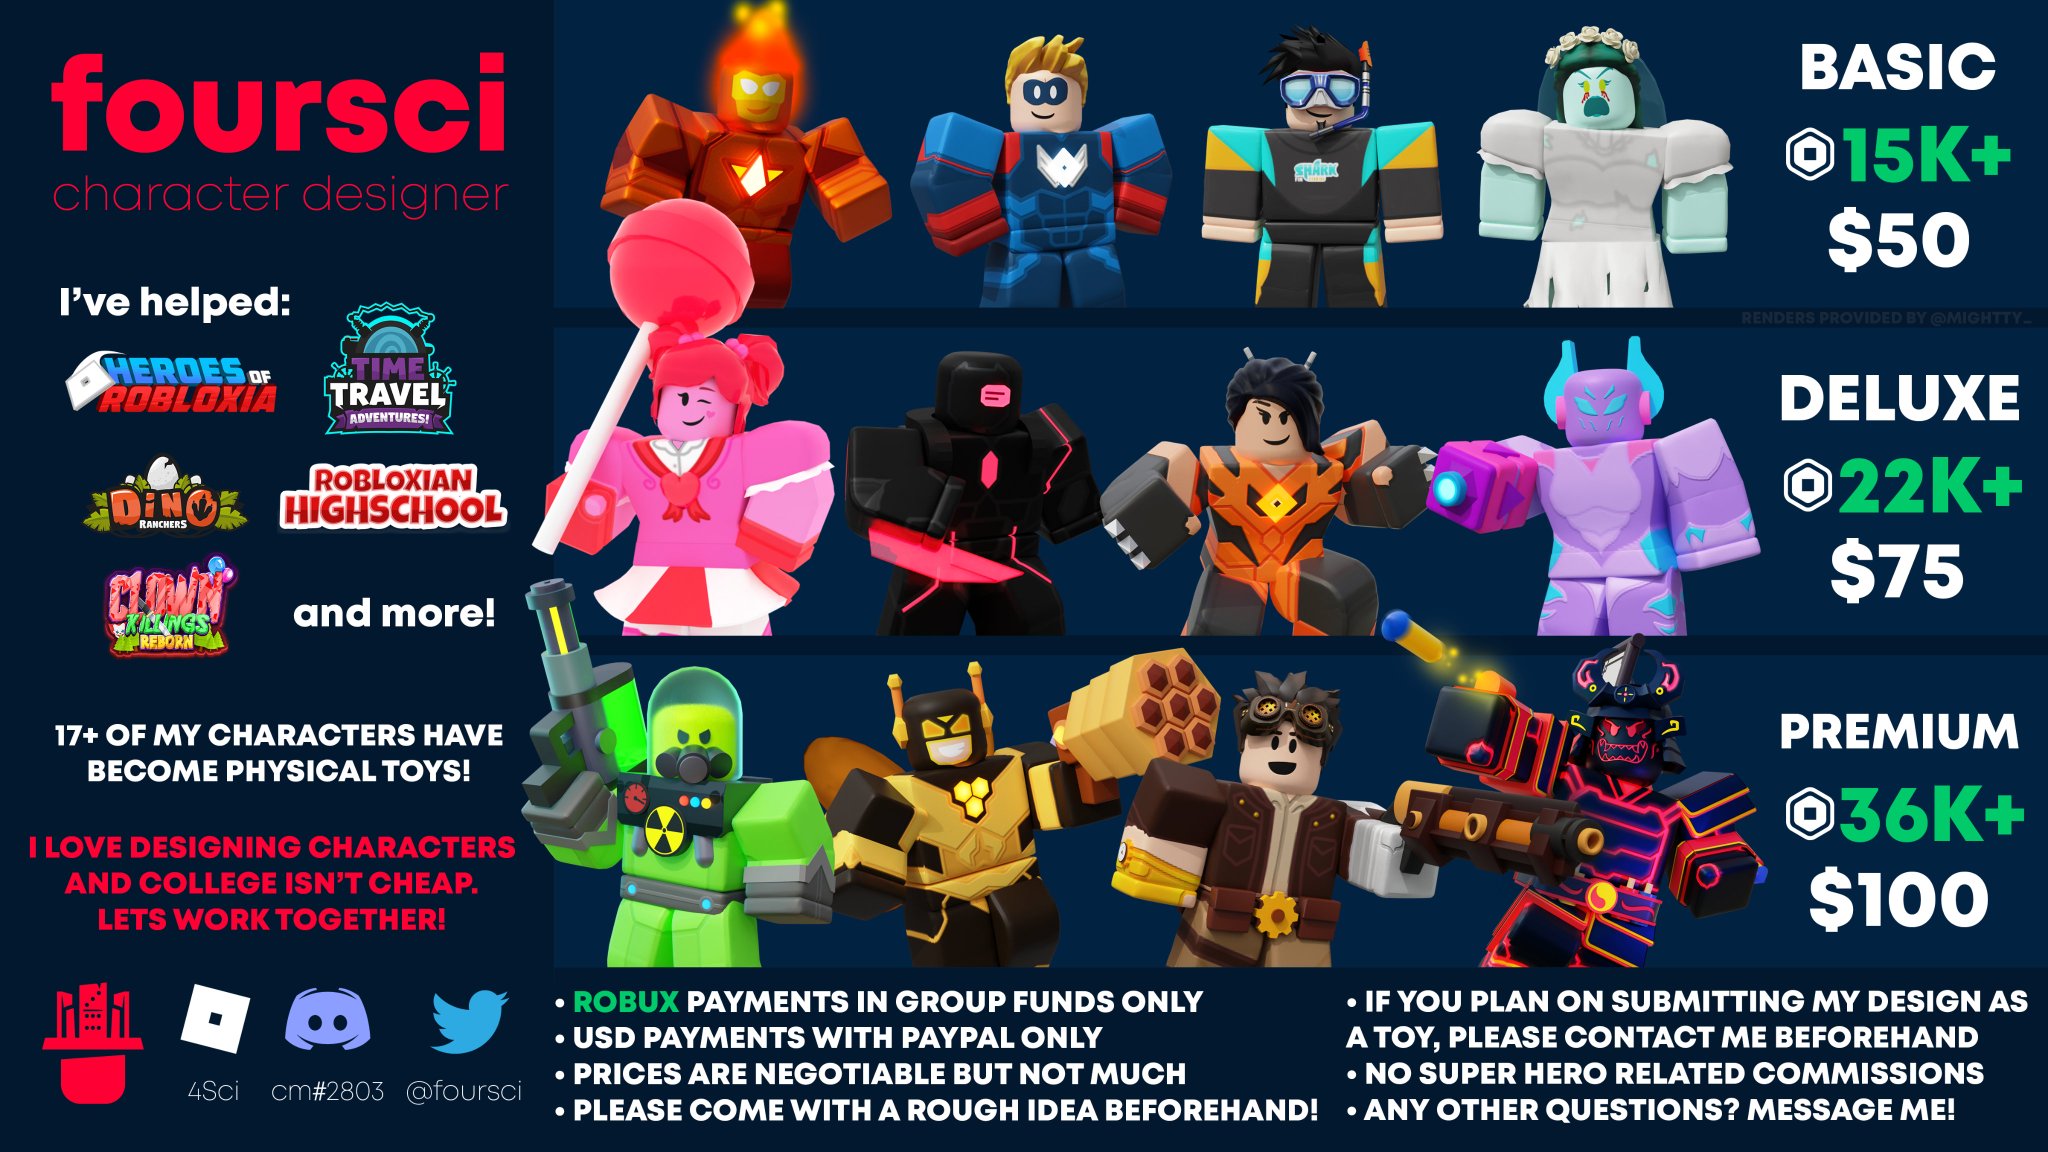 Foursci On Twitter 2020 Commissions Open School Is Super Busy This Year So I M Going To Open 10 Slots For Character Designs Please Dm Me On Here If You Re Interested - 4sci roblox toy